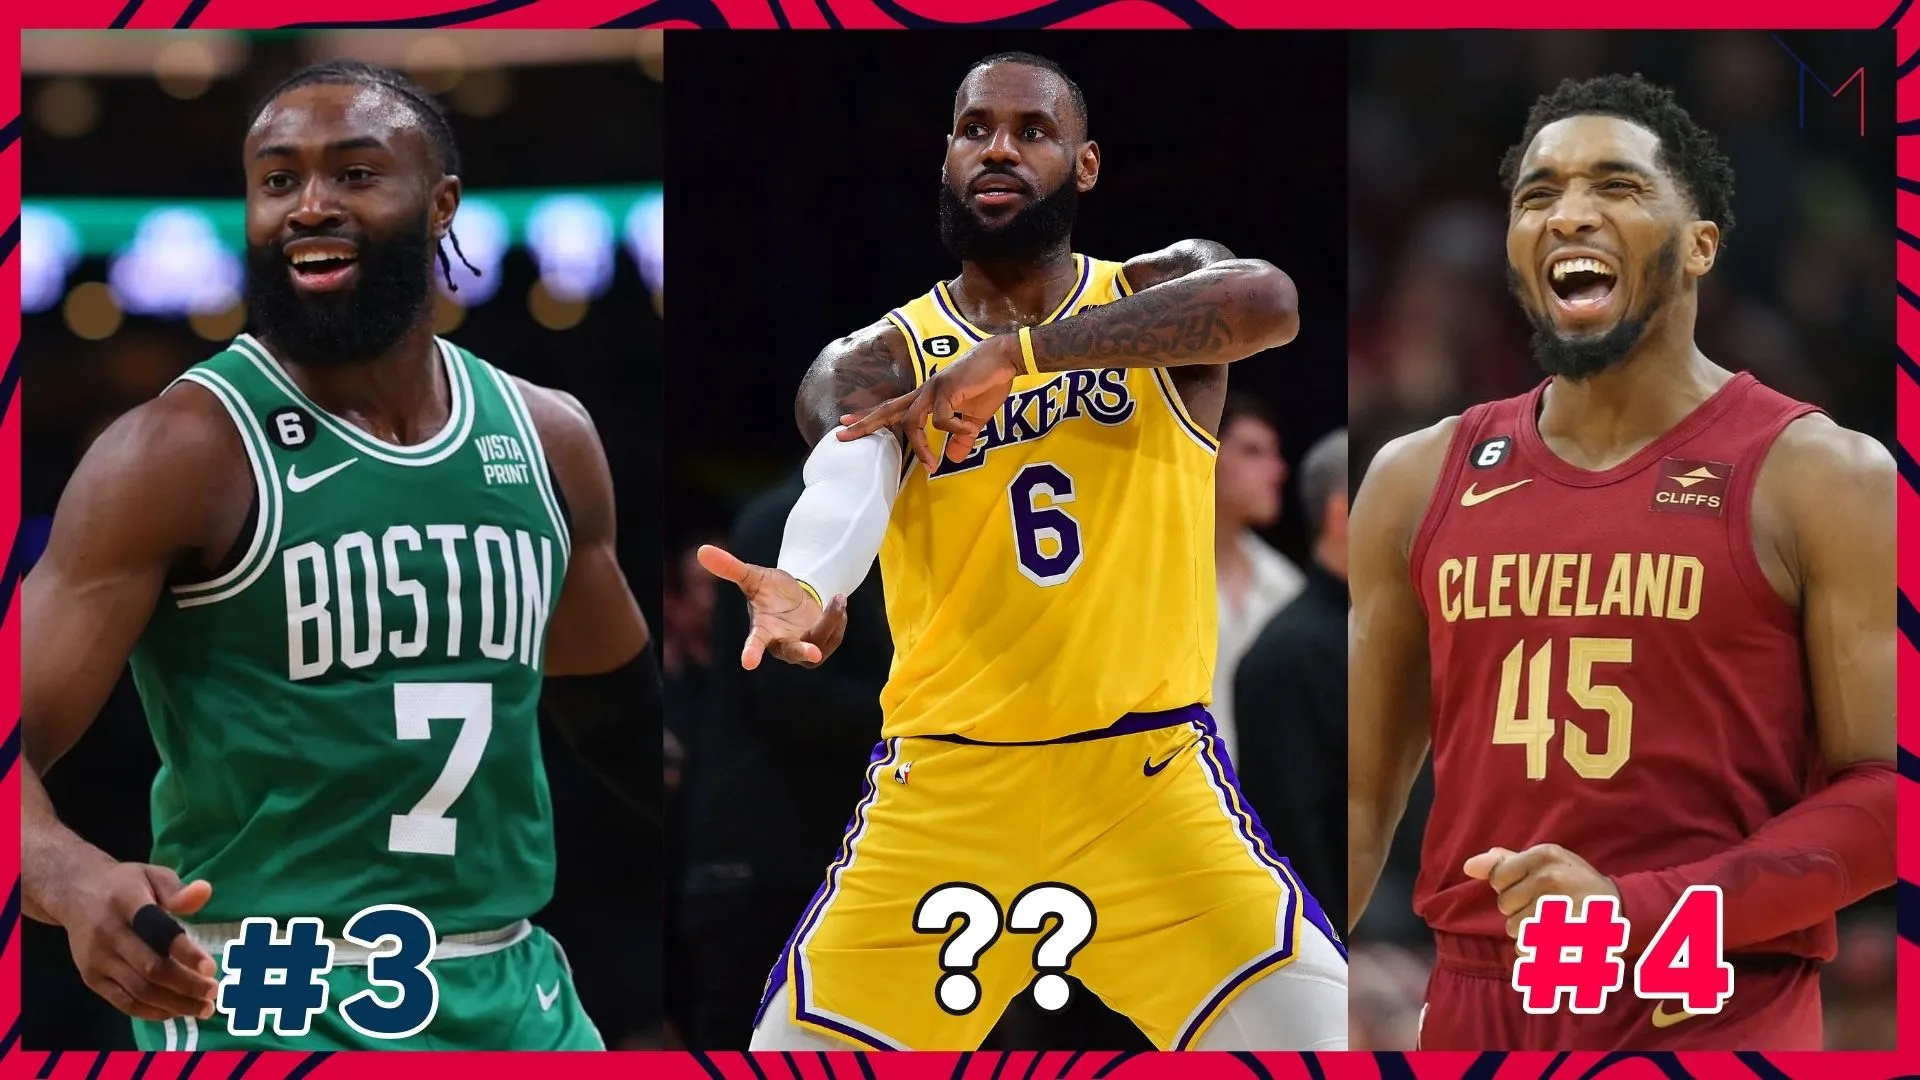 Top 10 most popular NBA teams in the world - Popular clubs in the NBA